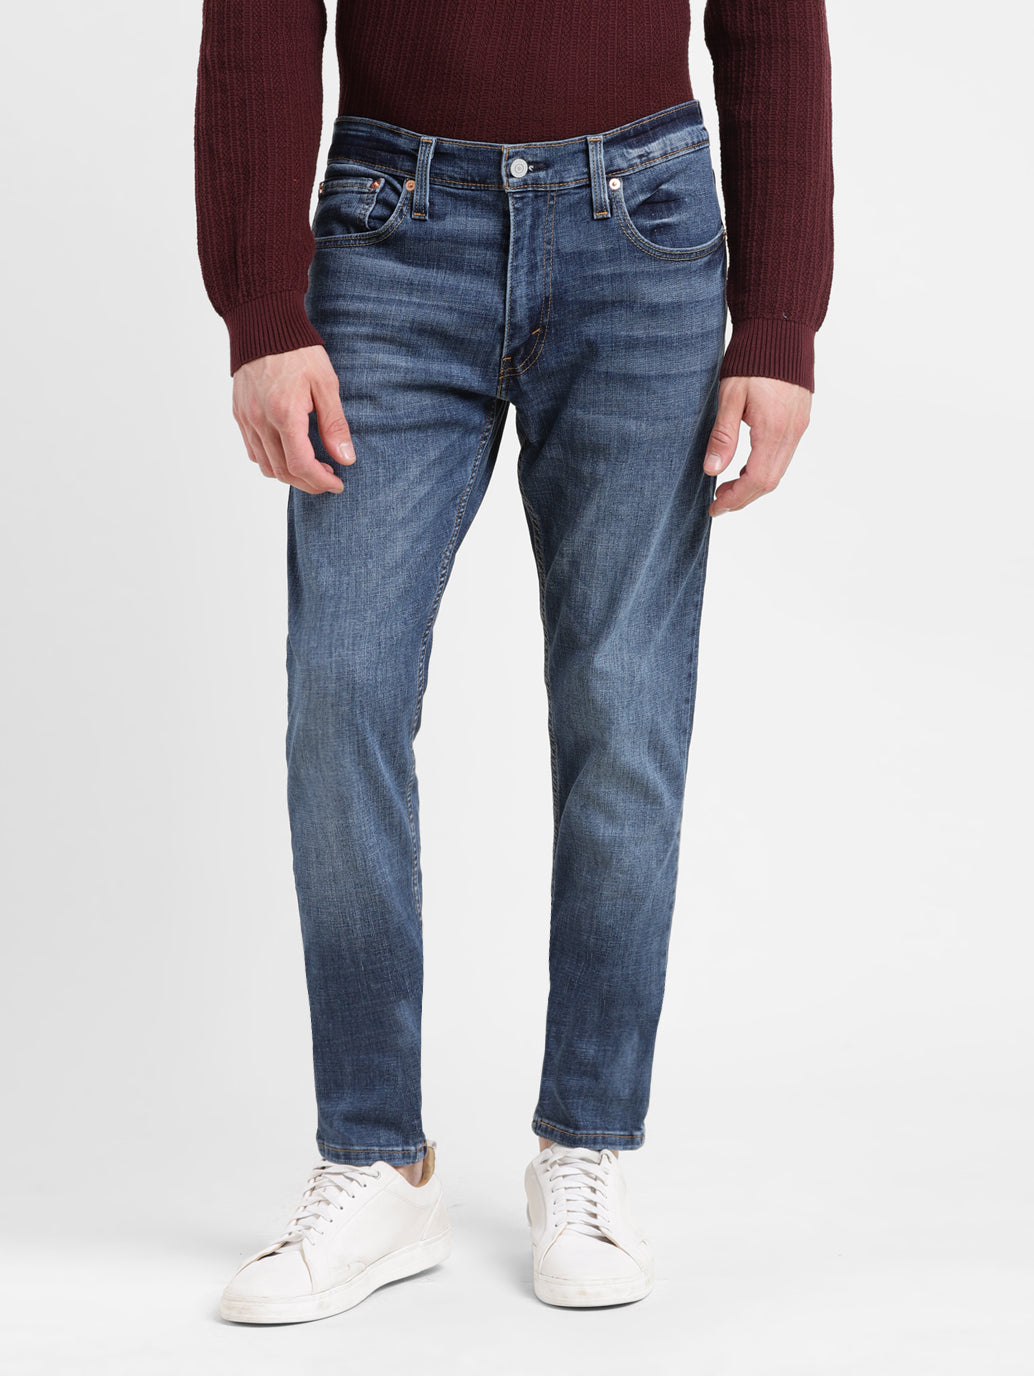 Ultimate Buying Guide To Levis Jeans (501, 502, 511, 541, 510